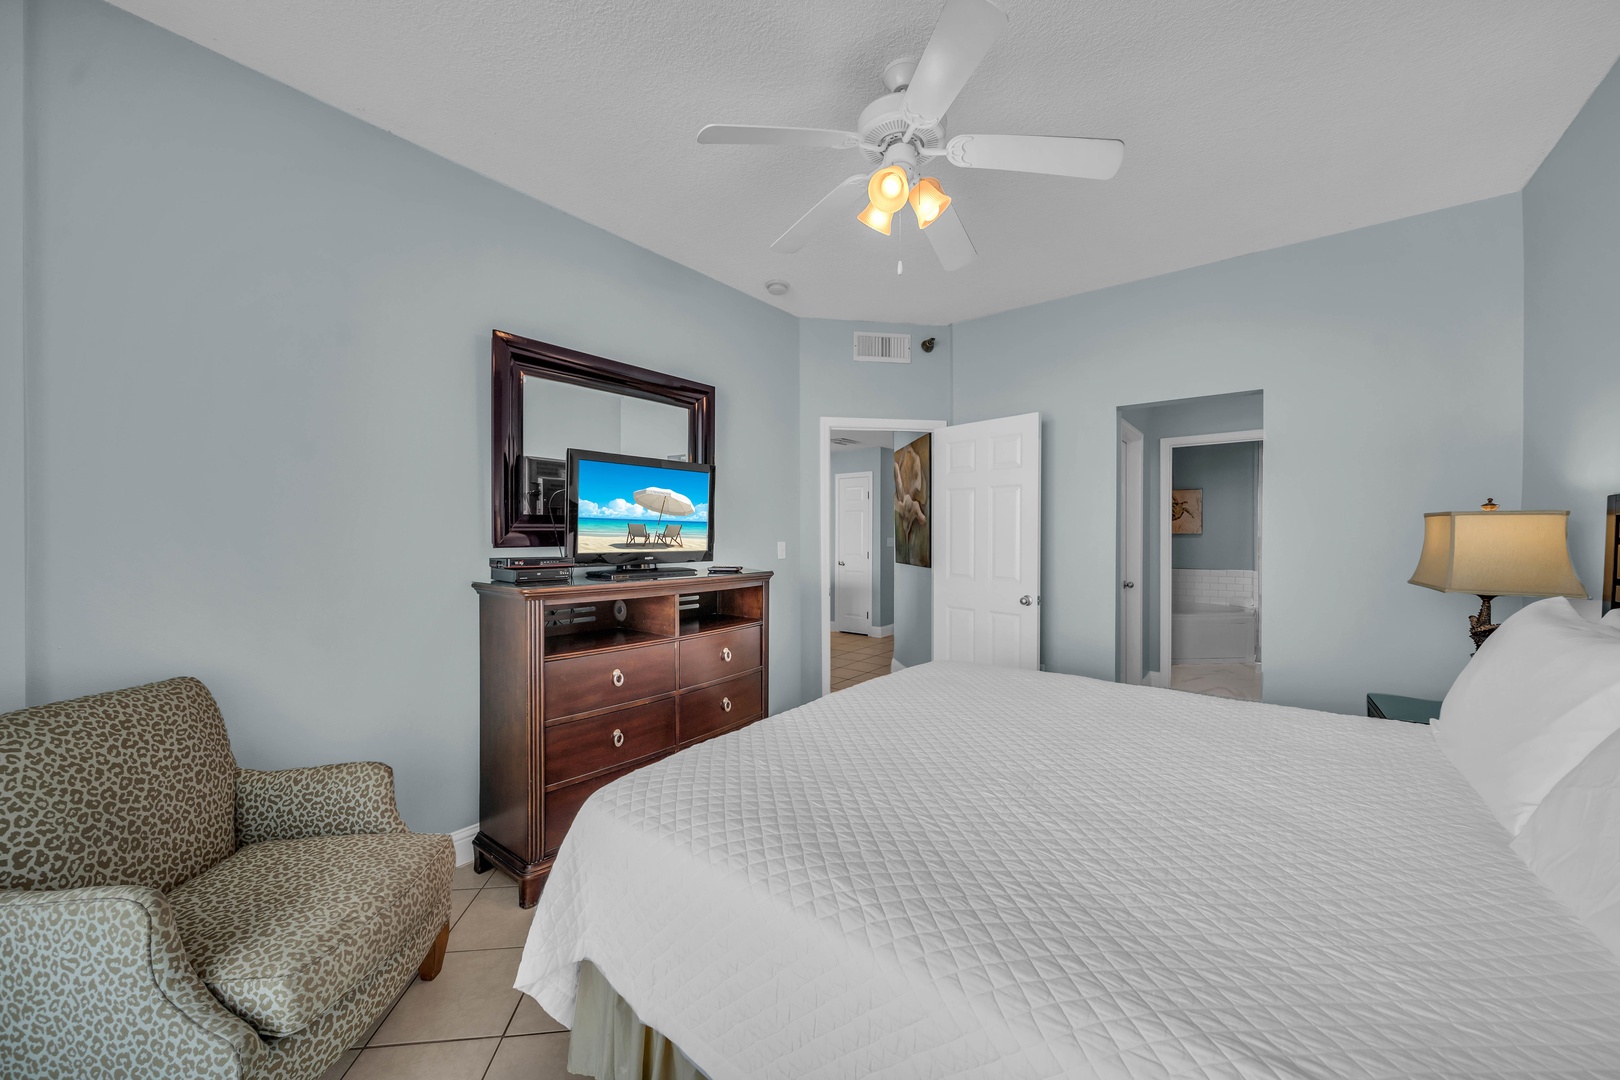 The Primary Bedroom features a HD Flat Screen TV and a large walk-in closet.